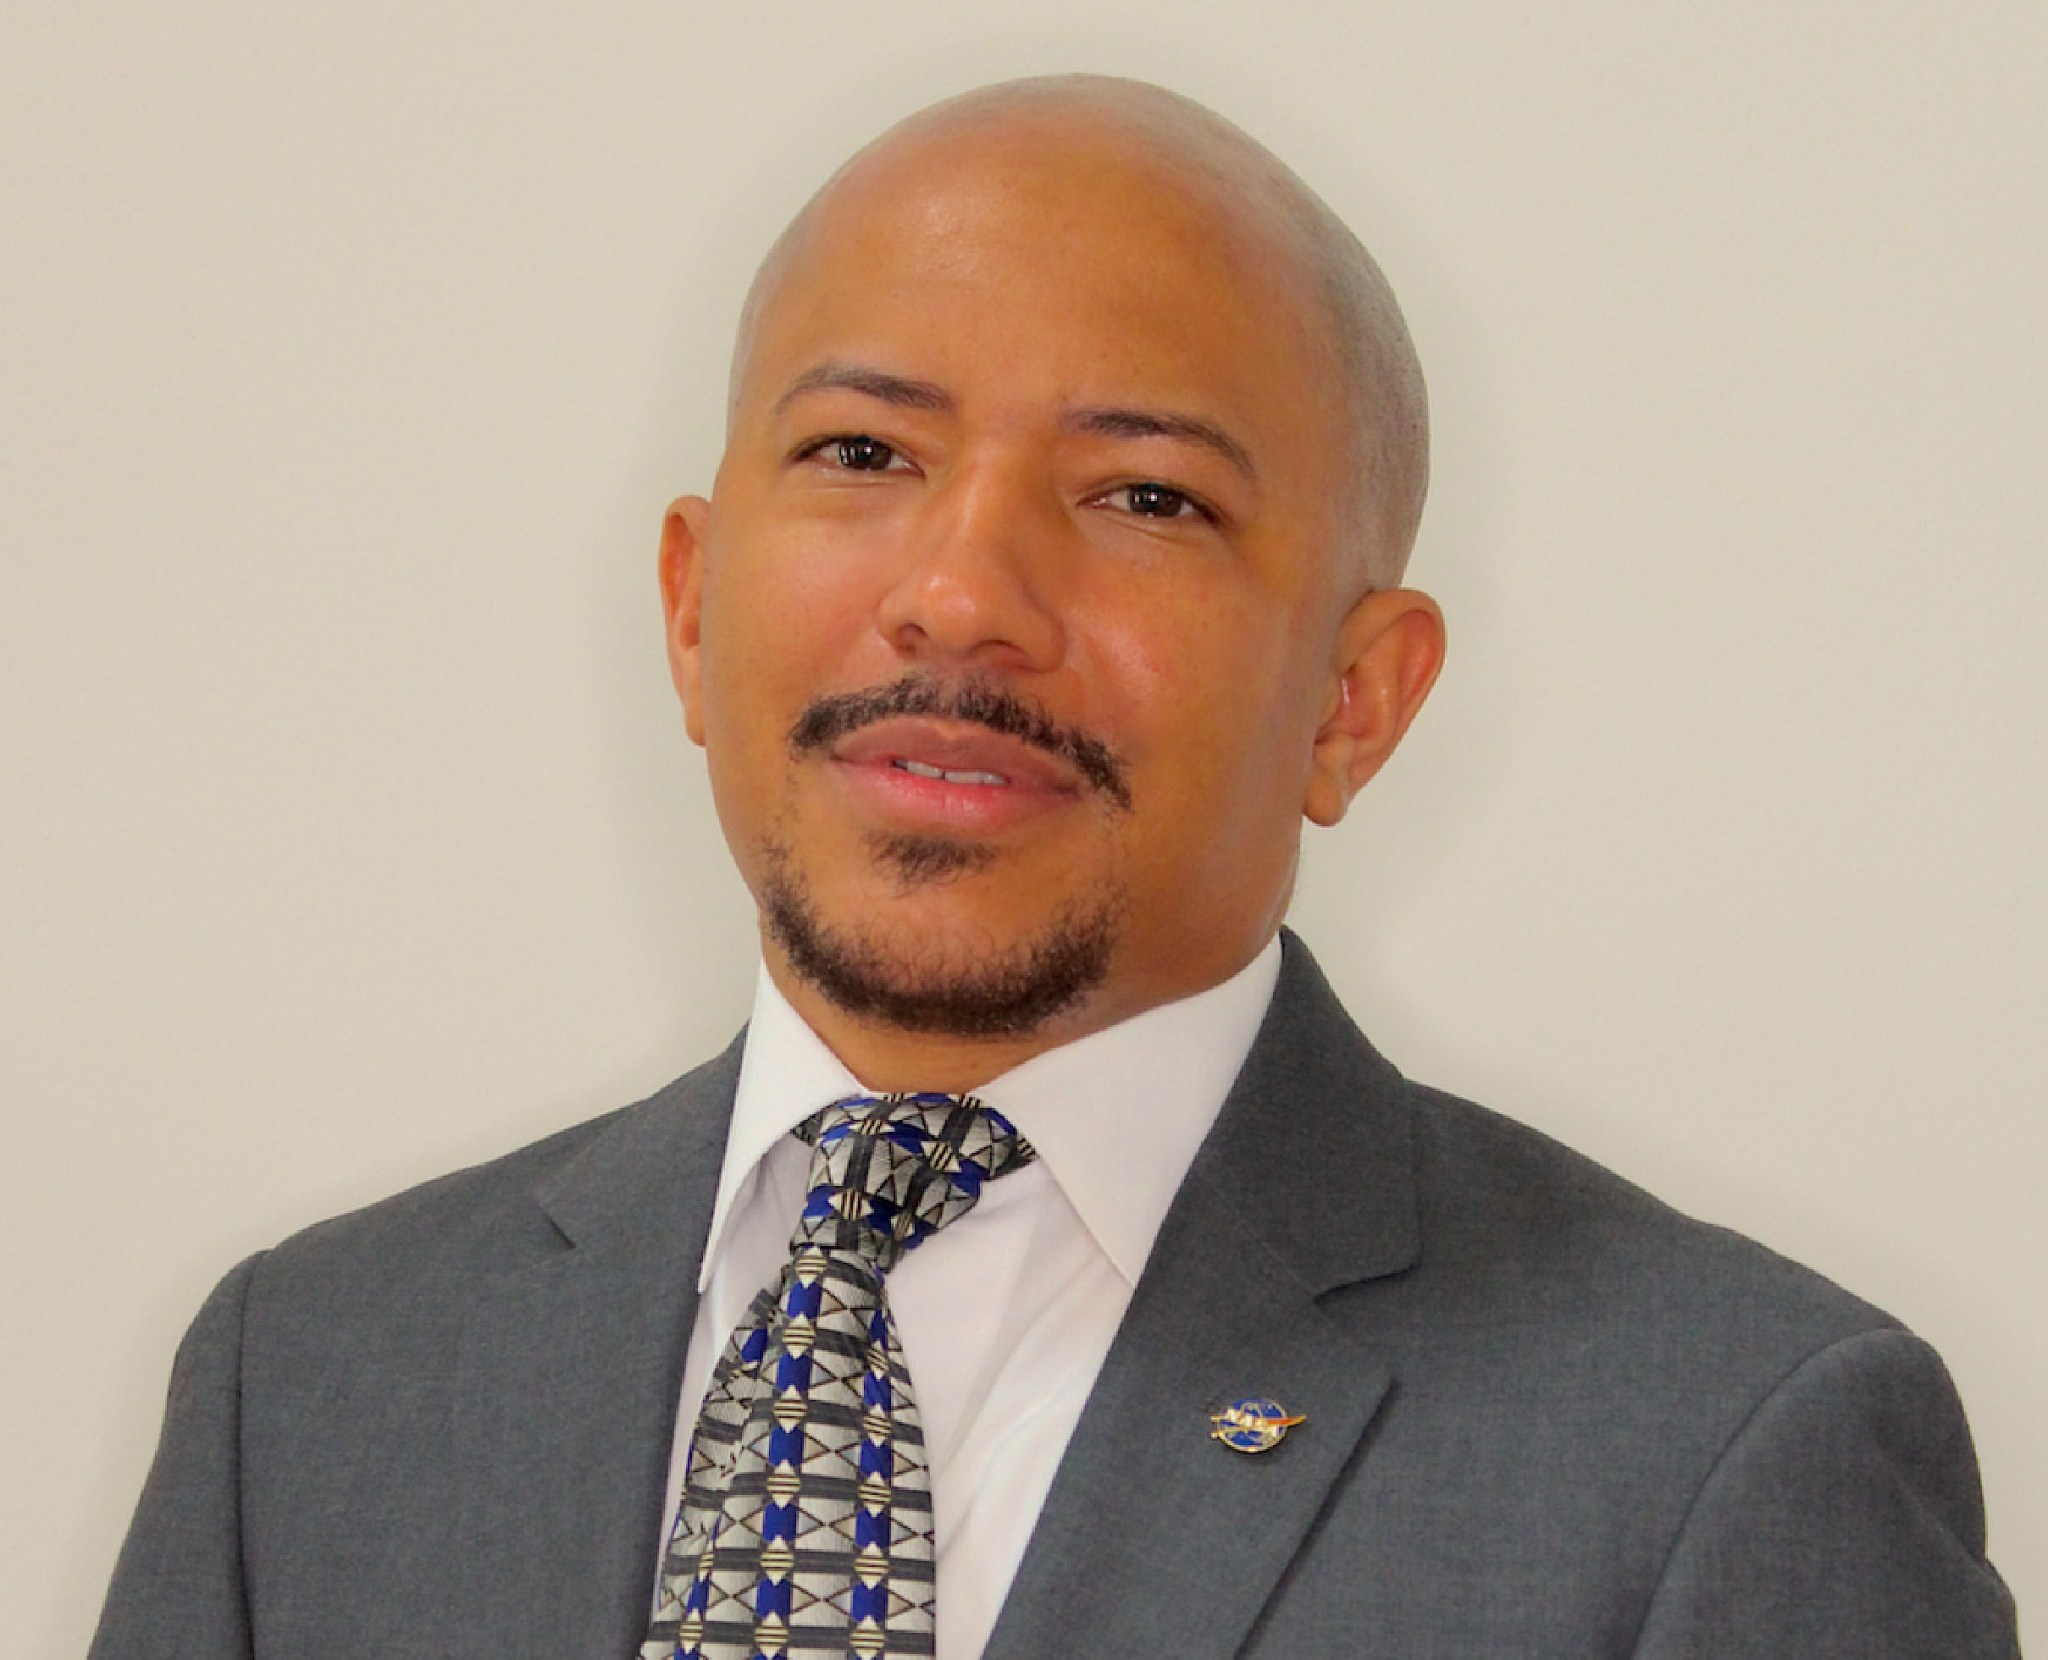 Man with tan skin and black facial hair, with a shaved head, wears a grey suit jacket, NASA pin, blue and grey patterned tie, and white dress shirt against a light tan background.